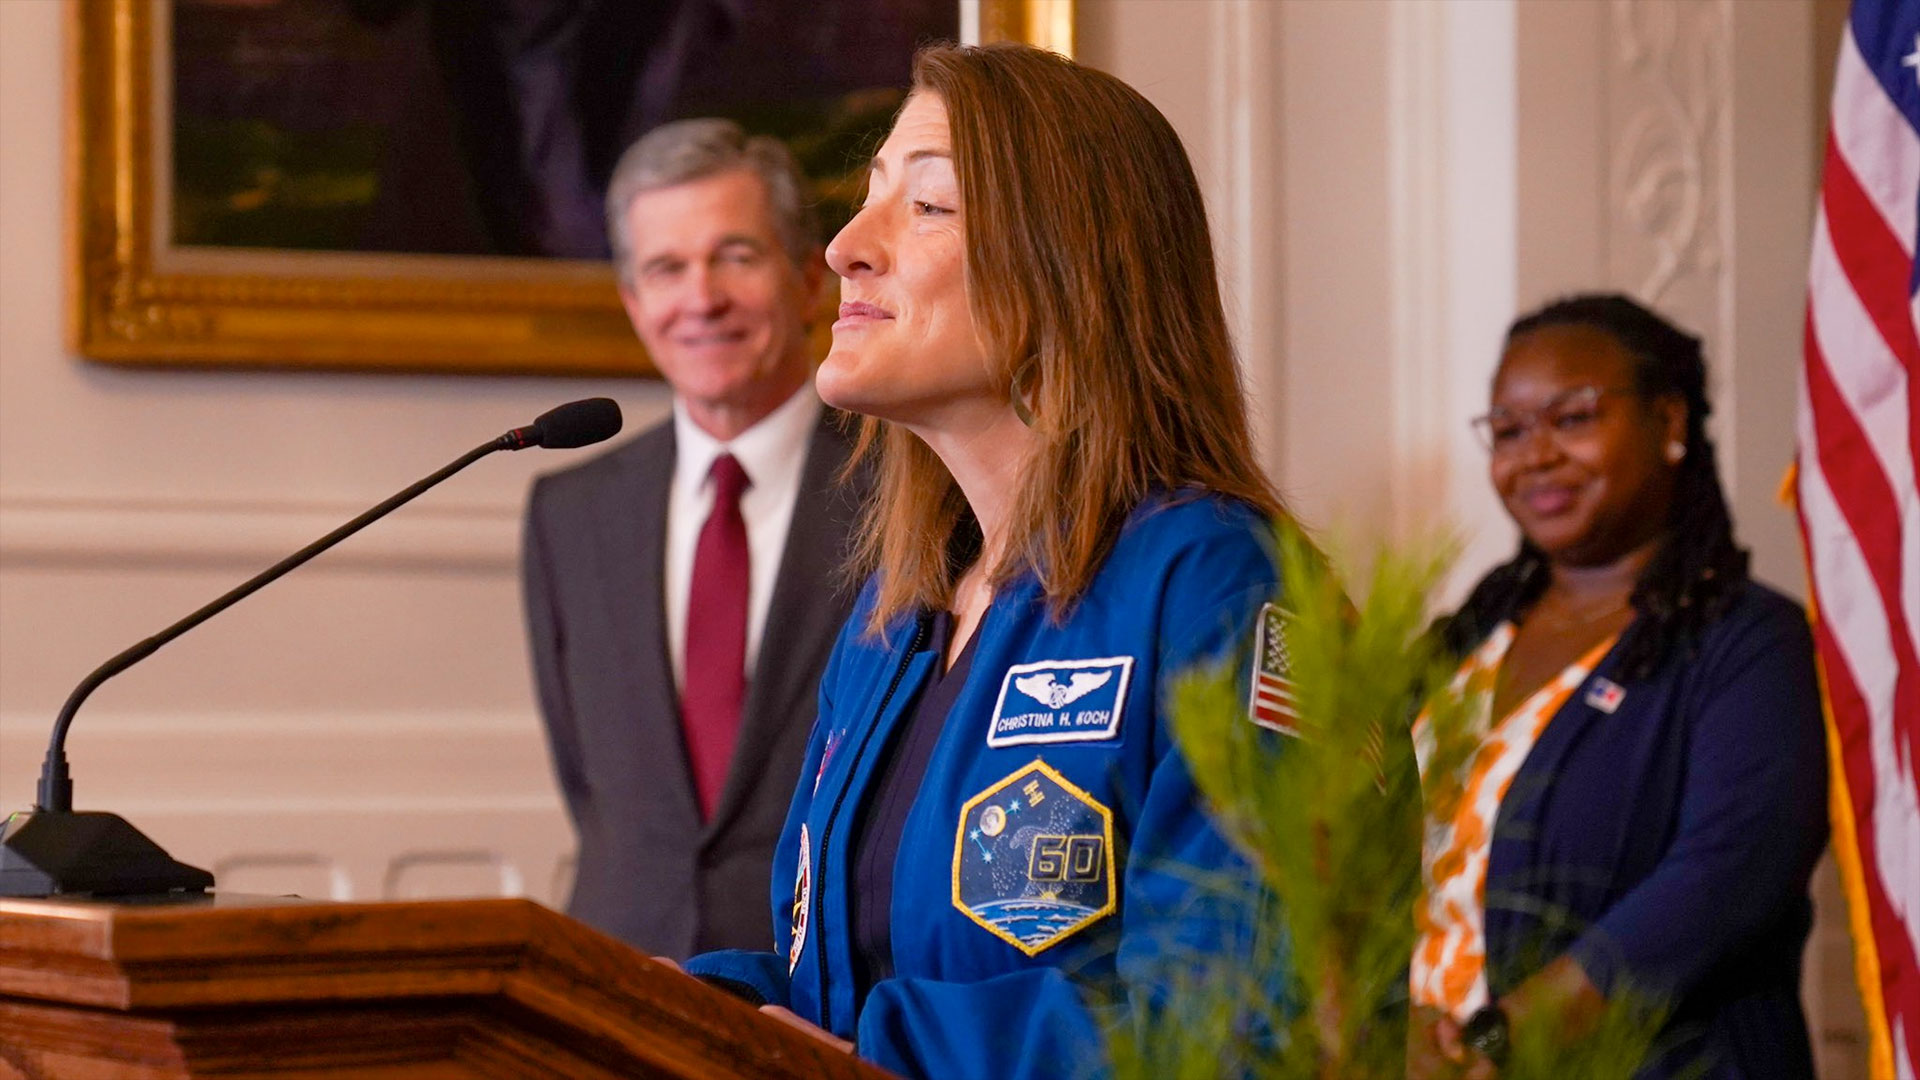 a woman in a blue flight suit stands at a podium with two smiling people and the american flag behind her.